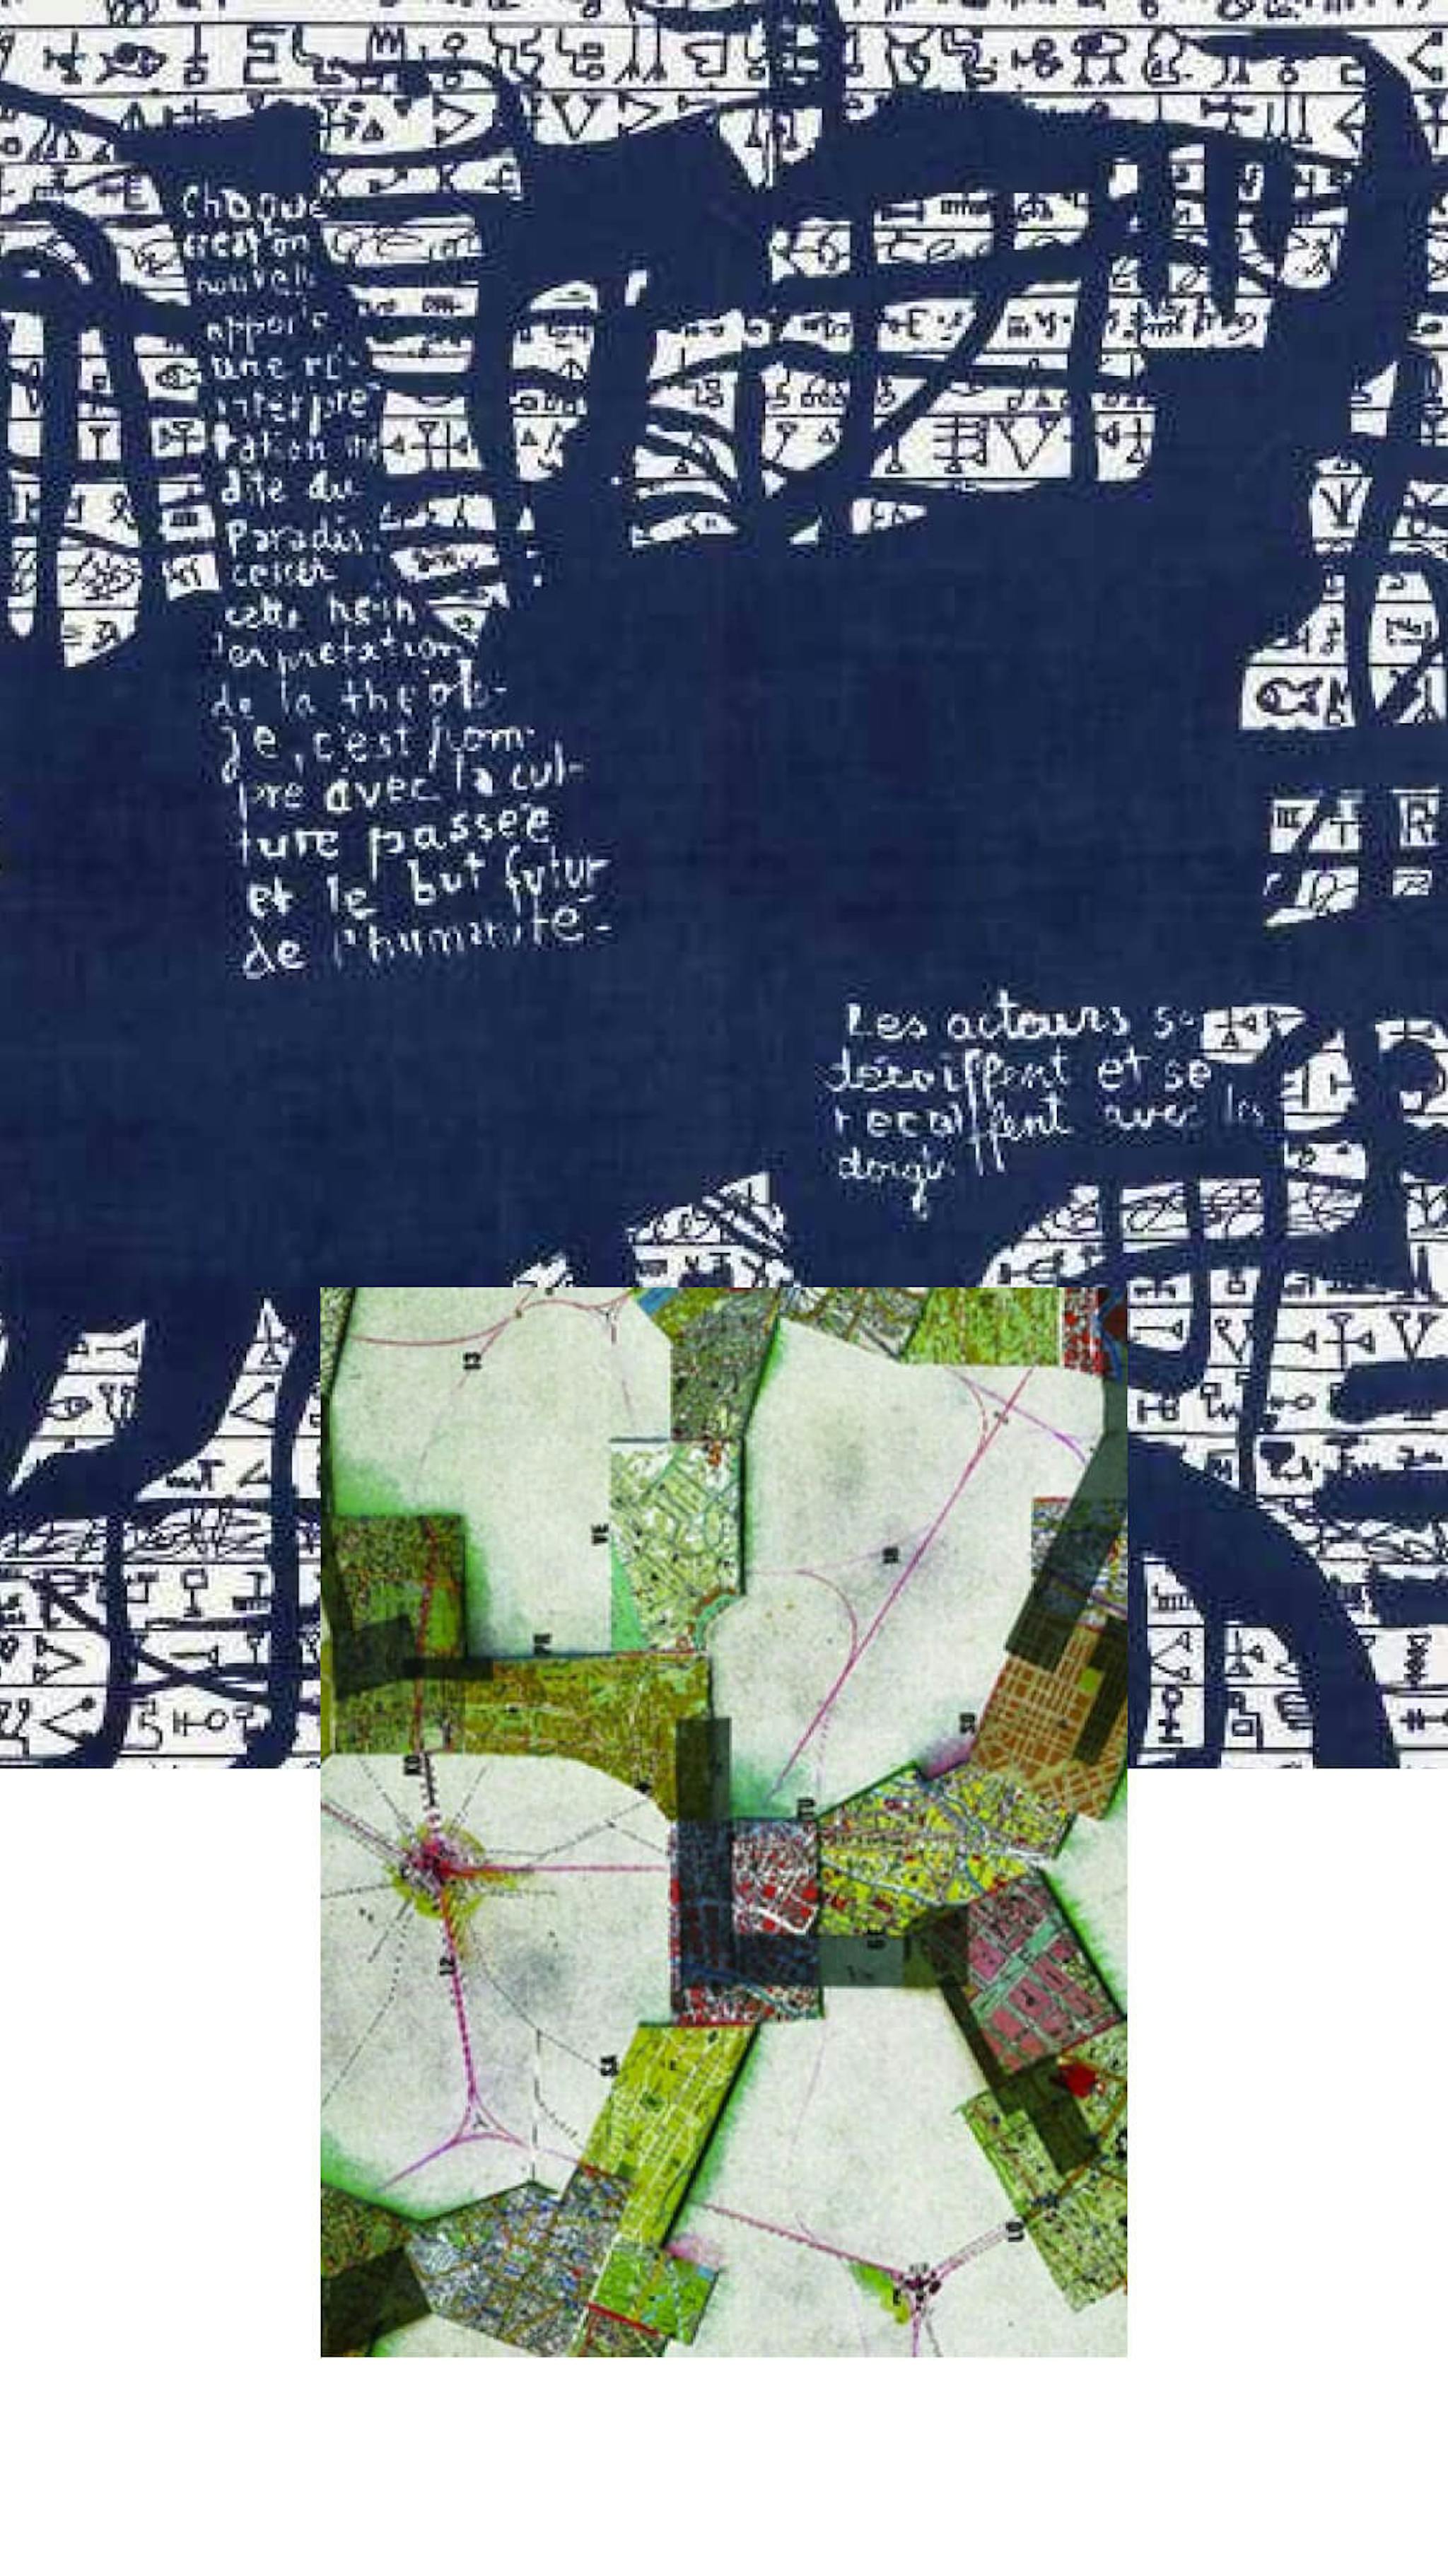 Top image: Map-like silhouettes over blue background with white text. Bottom image: Collaged aerial maps forming an abstract pattern.